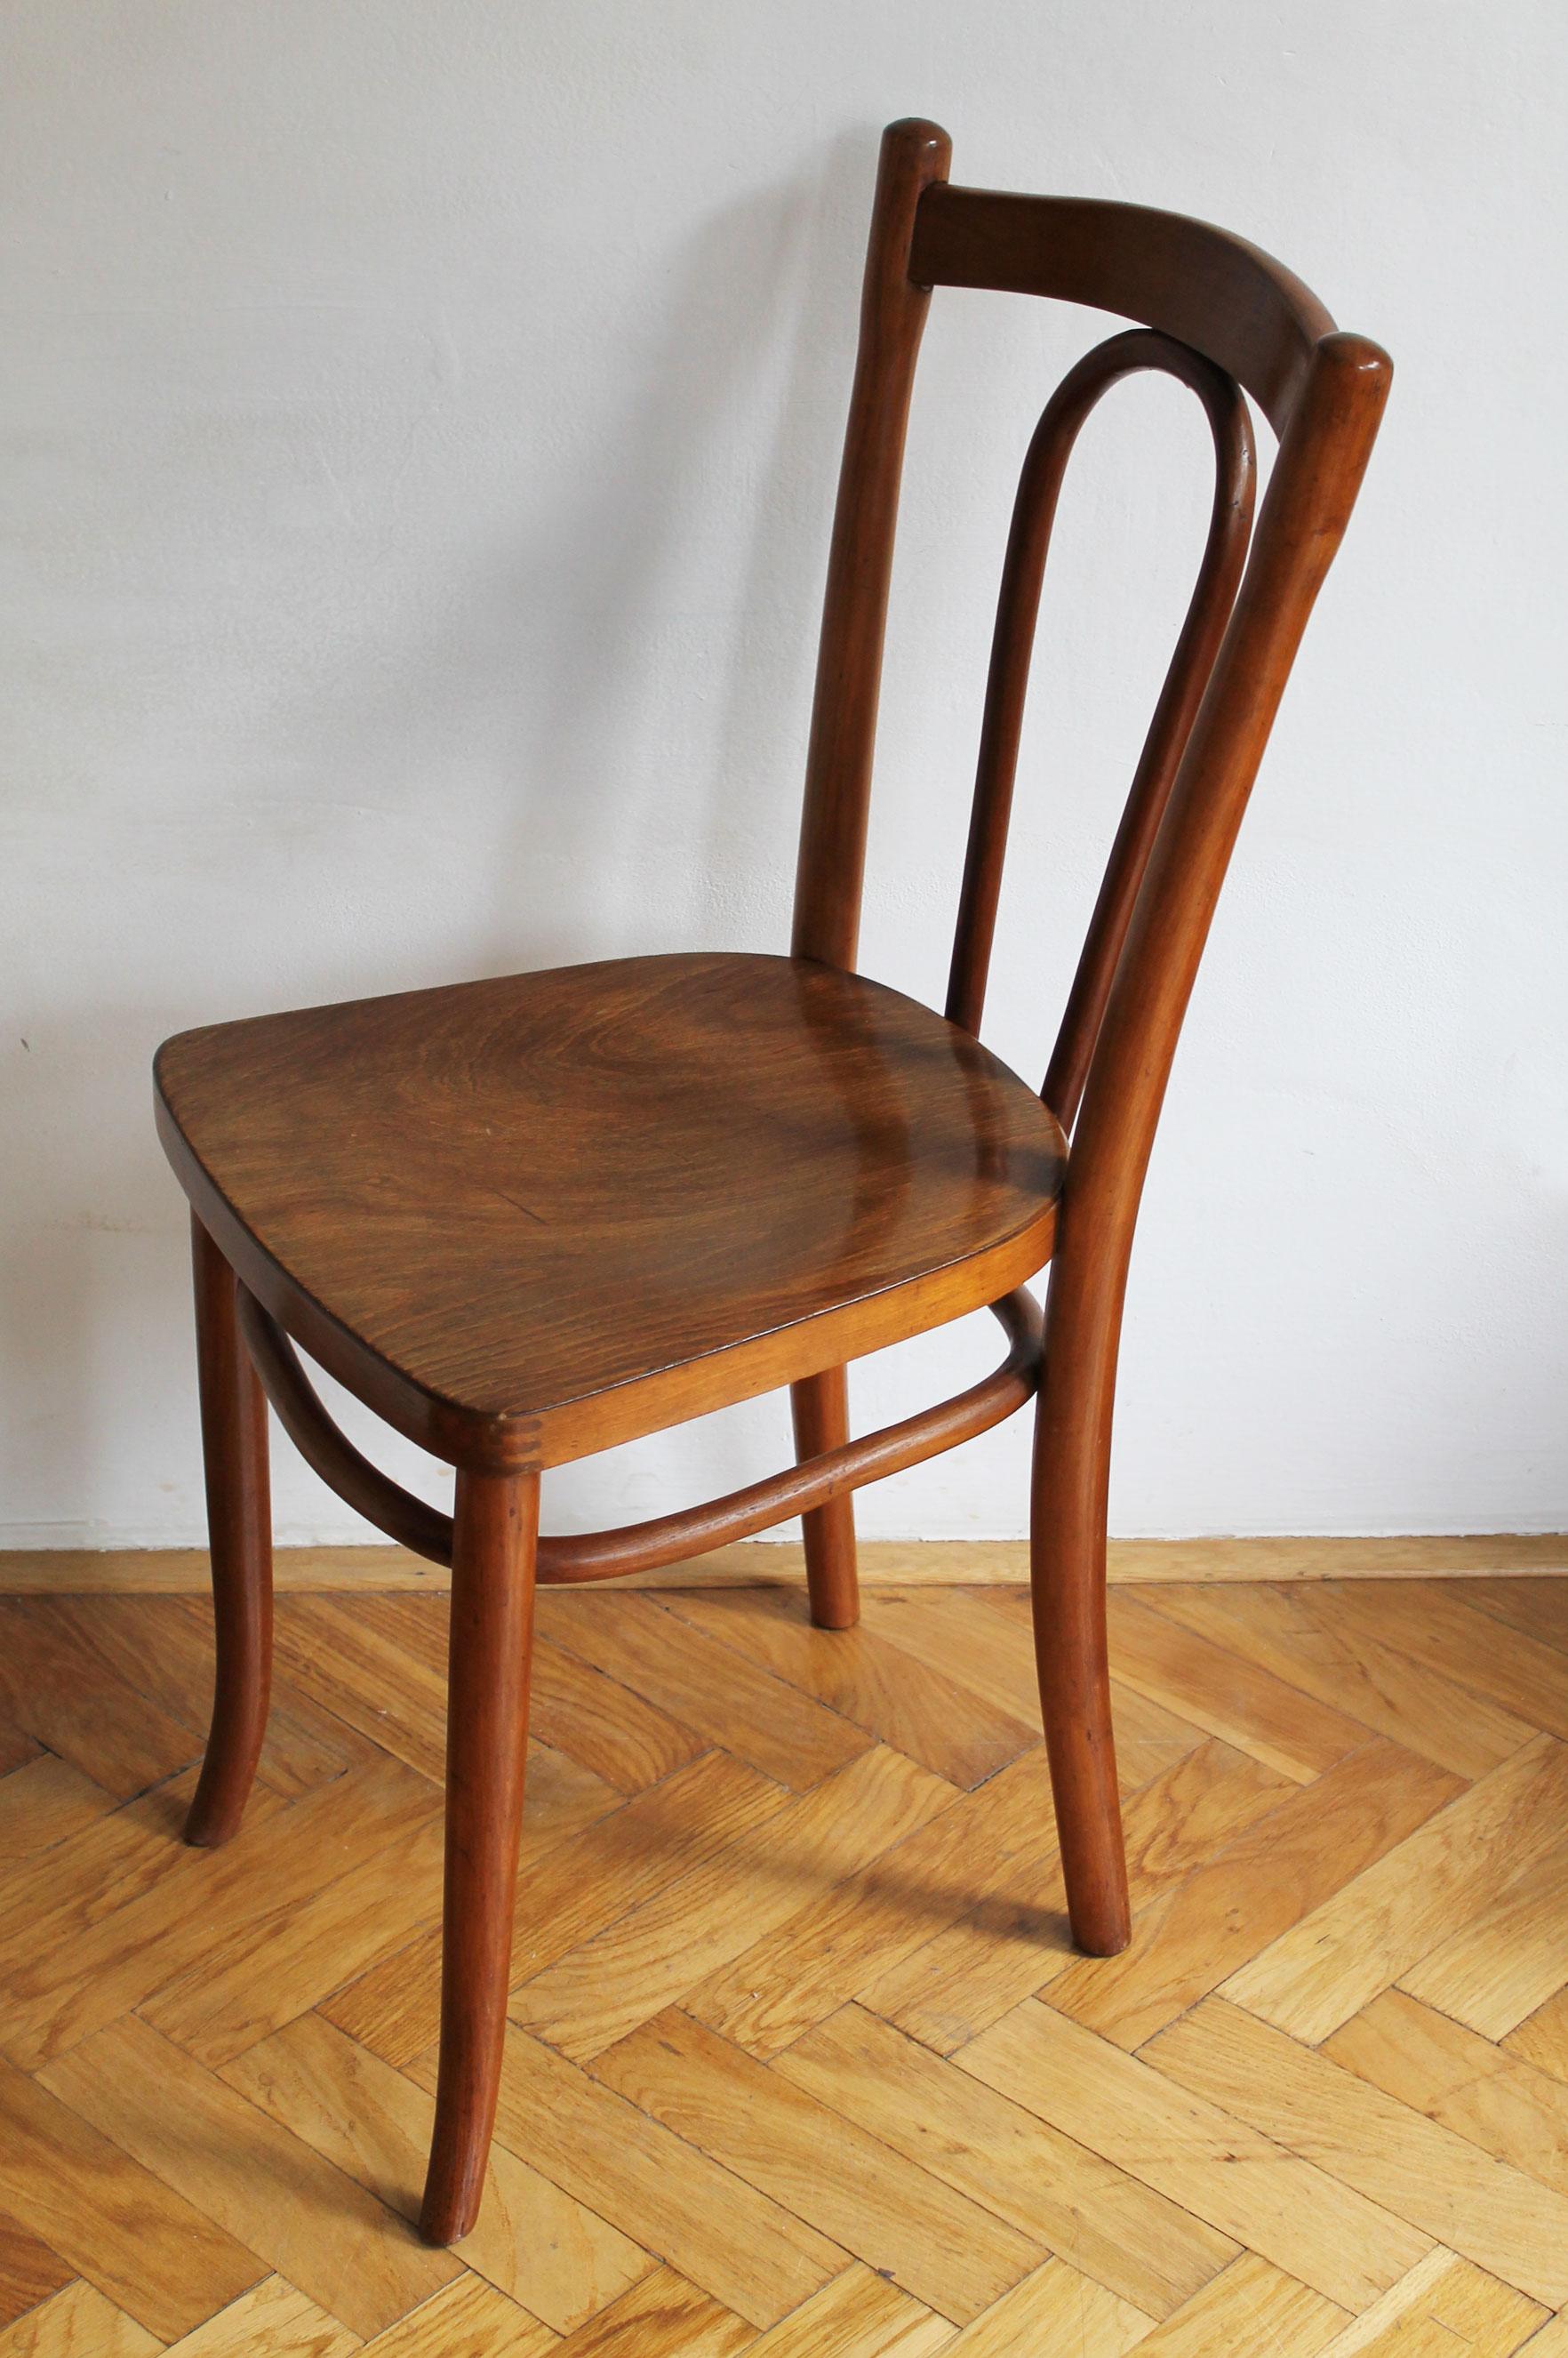 This is one of the most commercially successful chairs designed and produced by famous Gebrüder Thonet Company. It was first designed in 1885 (most likely by August Thonet) and can be found in Thonet catalogues in a slightly modified versions as